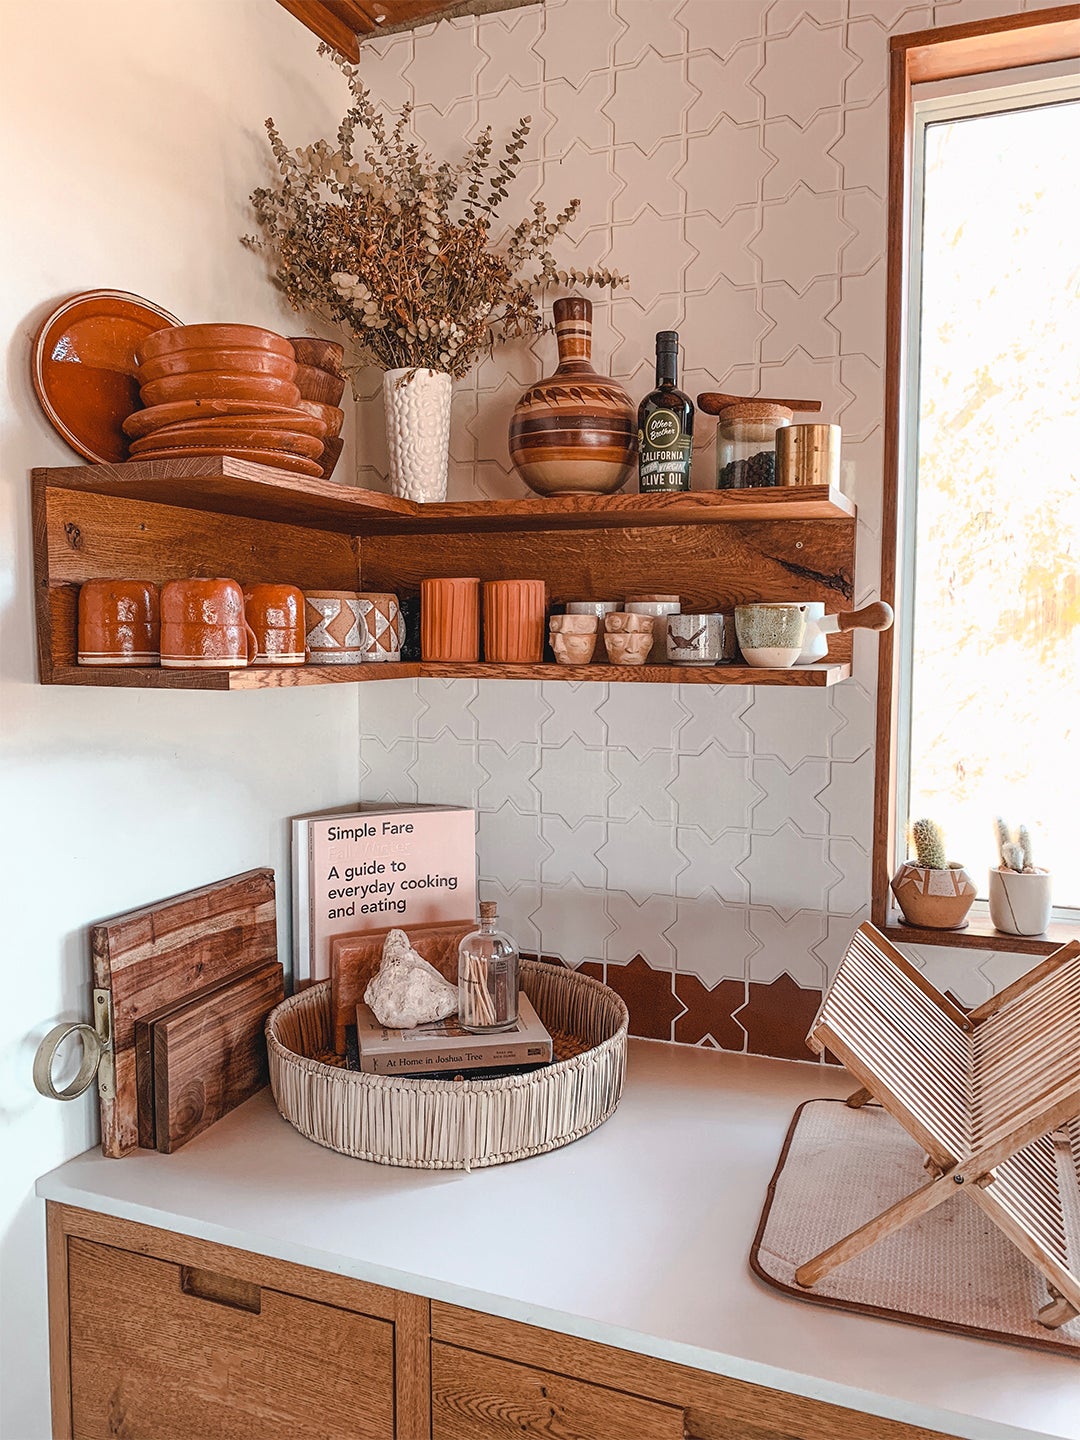 Open shelving with earth-toned mugs and pottery